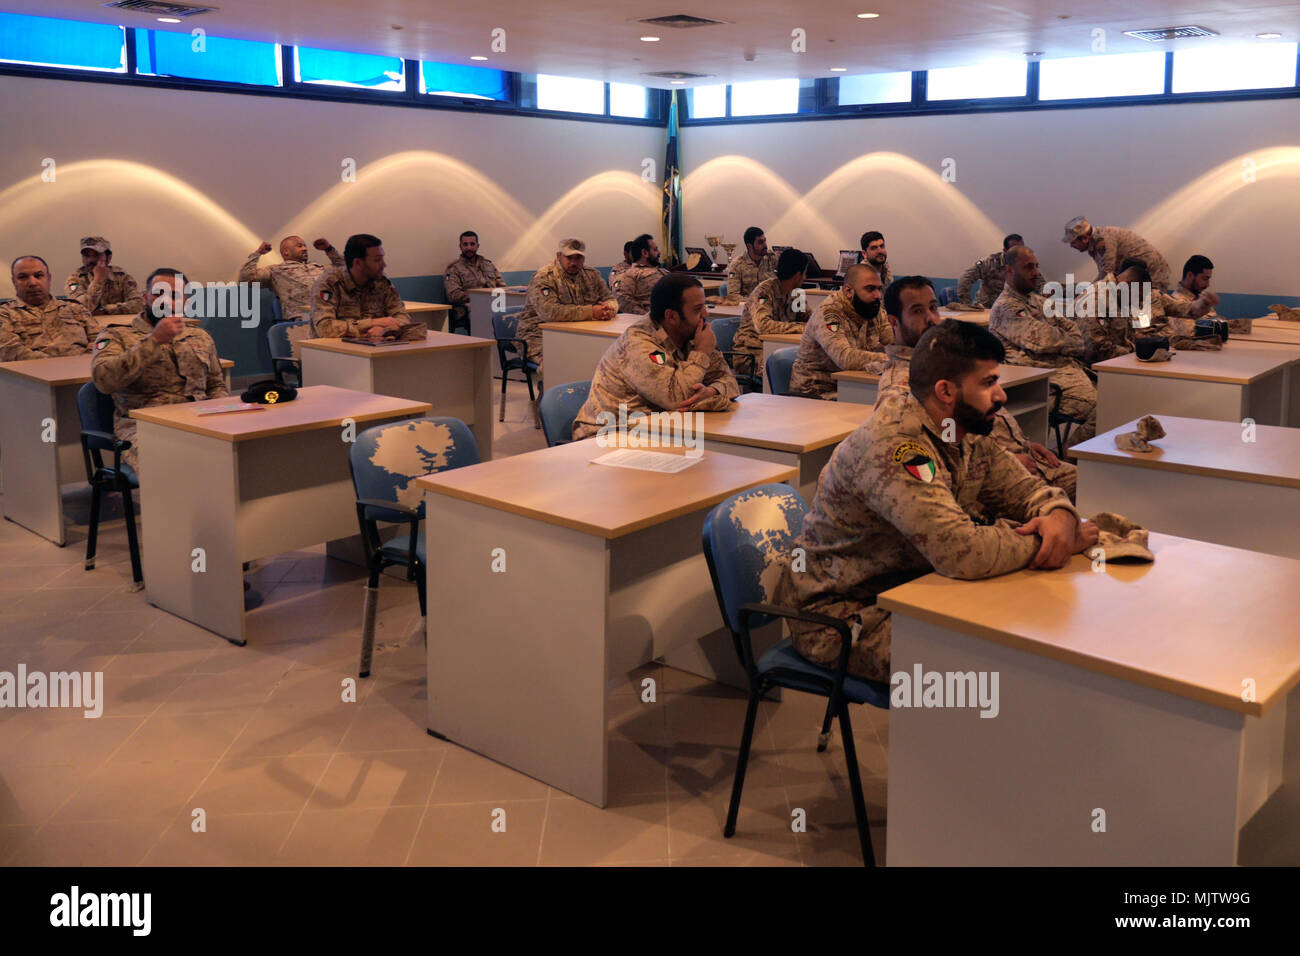 Twenty-seven Kuwaiti Marines gathered in a classroom at the Kuwait Naval Institute to attend the Tactical Resupply Subject Matter Expert Exchange with U.S. Marines from the Command Element and Logistics Combat Element, Special Purpose Marine Air-Ground Task Force – Crisis Response – Central Command. Exchanging logistic concepts and best practices allowed participants to learn from each other and strengthened relationships. Stock Photo